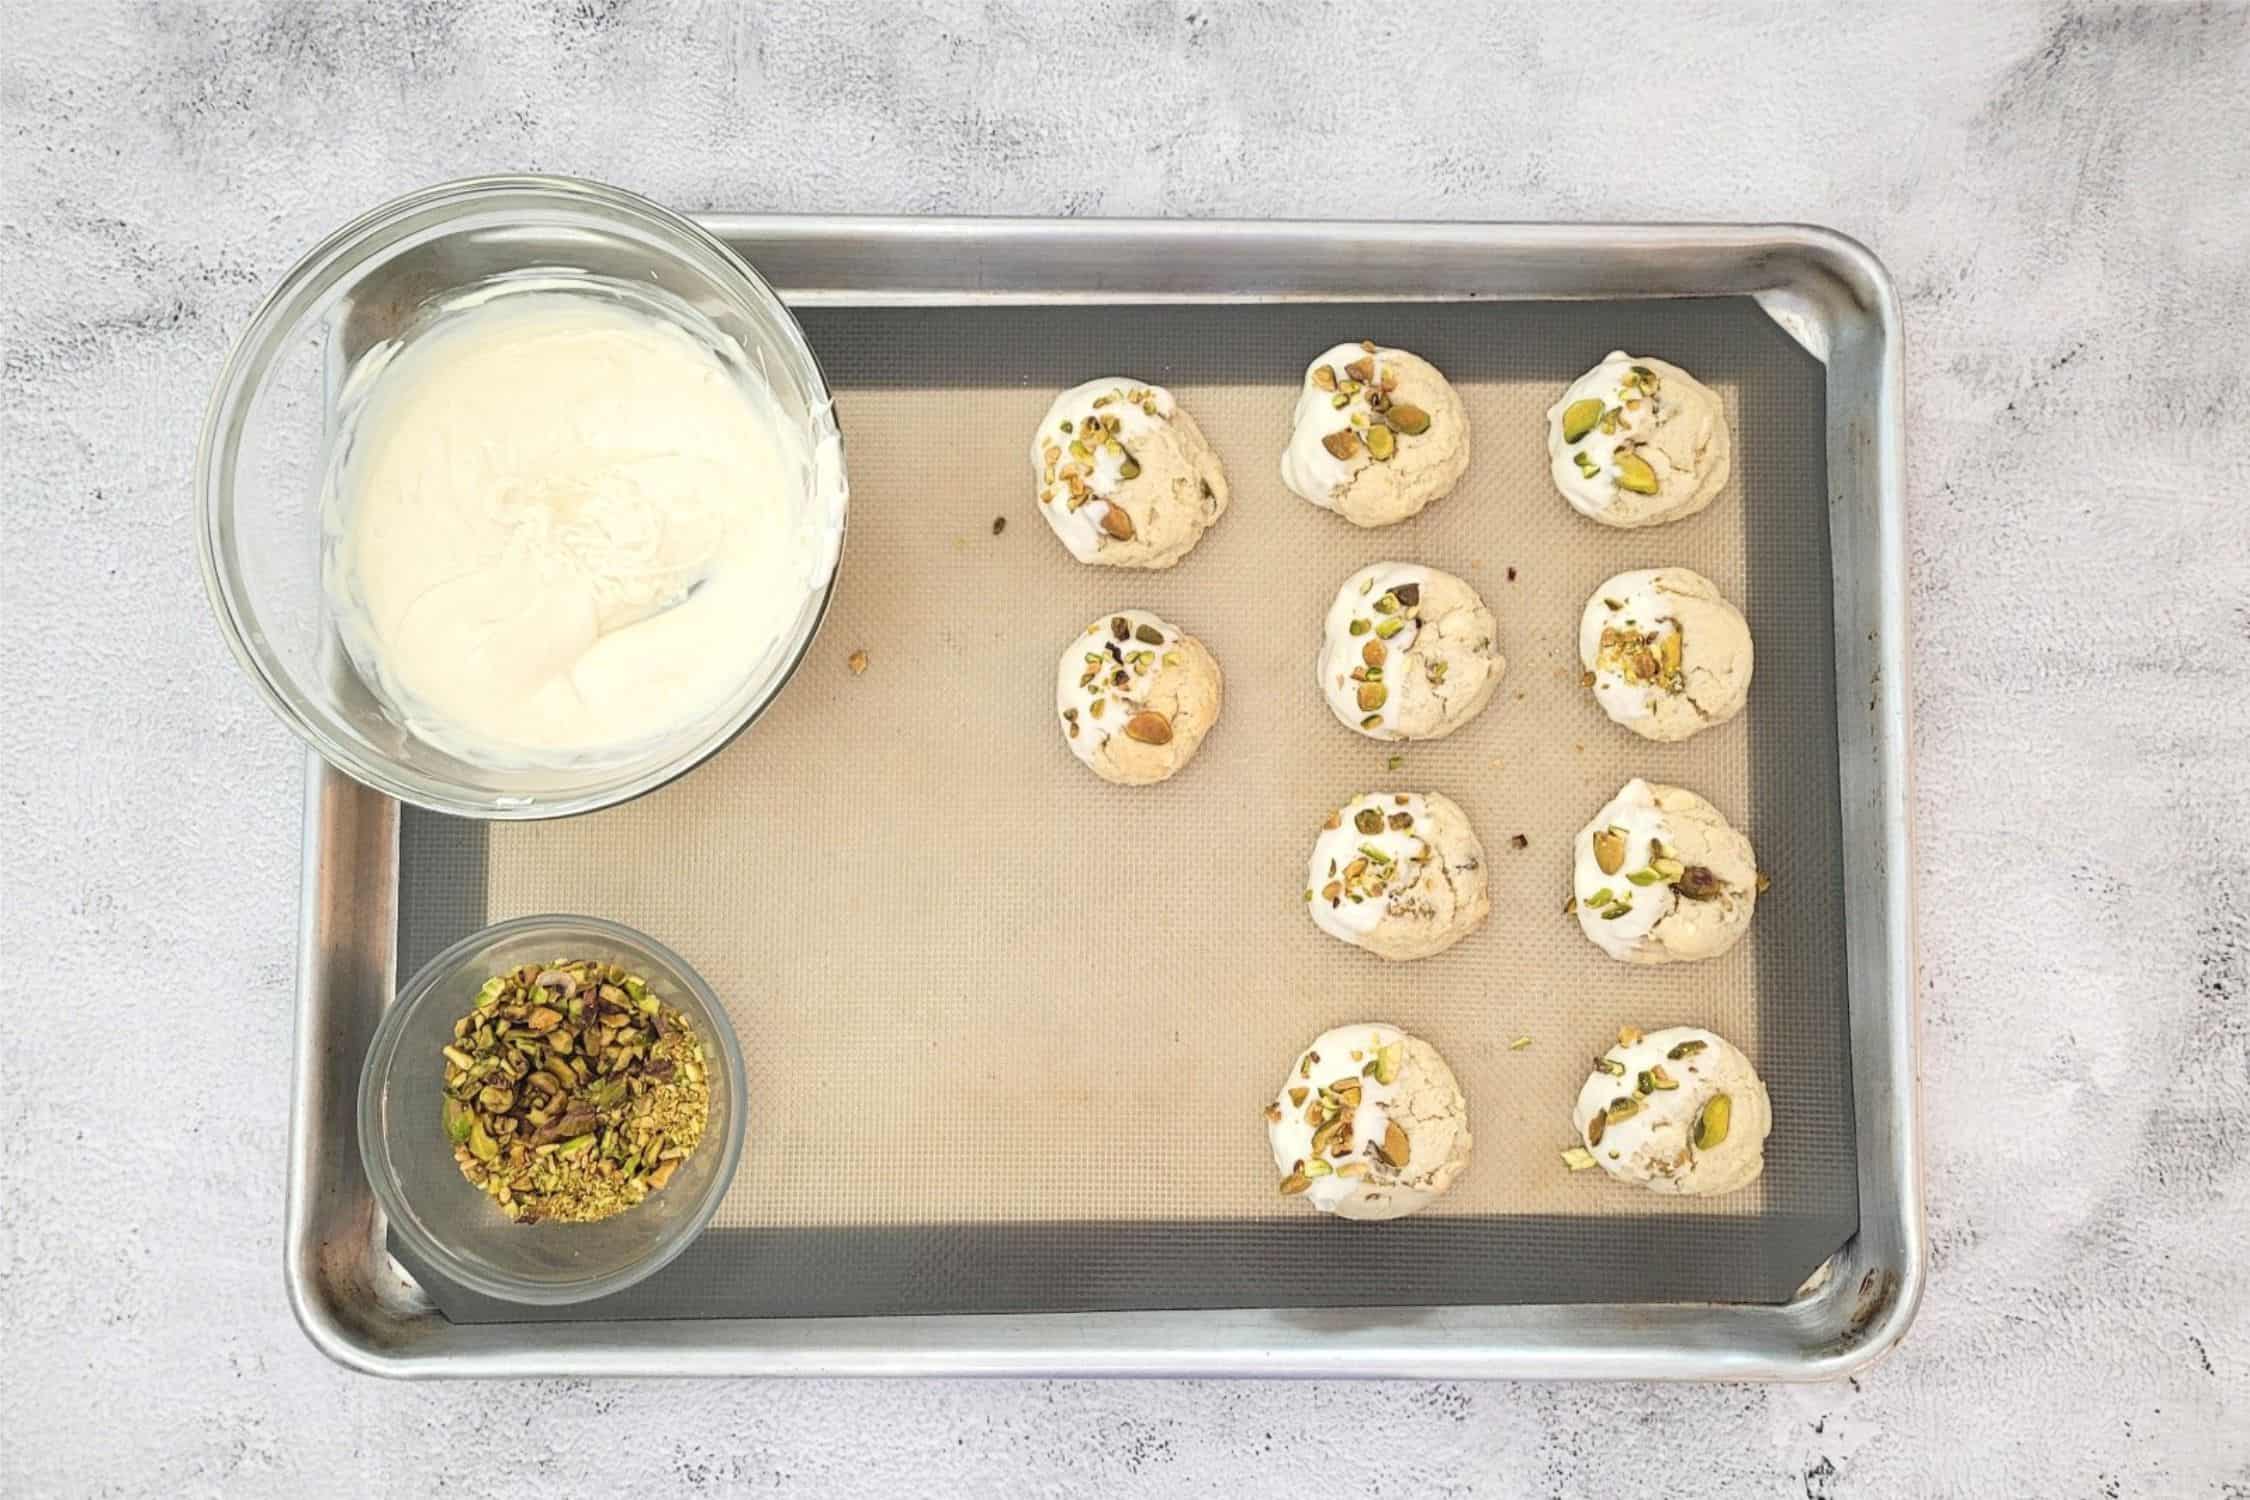 cookies dipped in white chocolate and spinkled with pistachio pieces